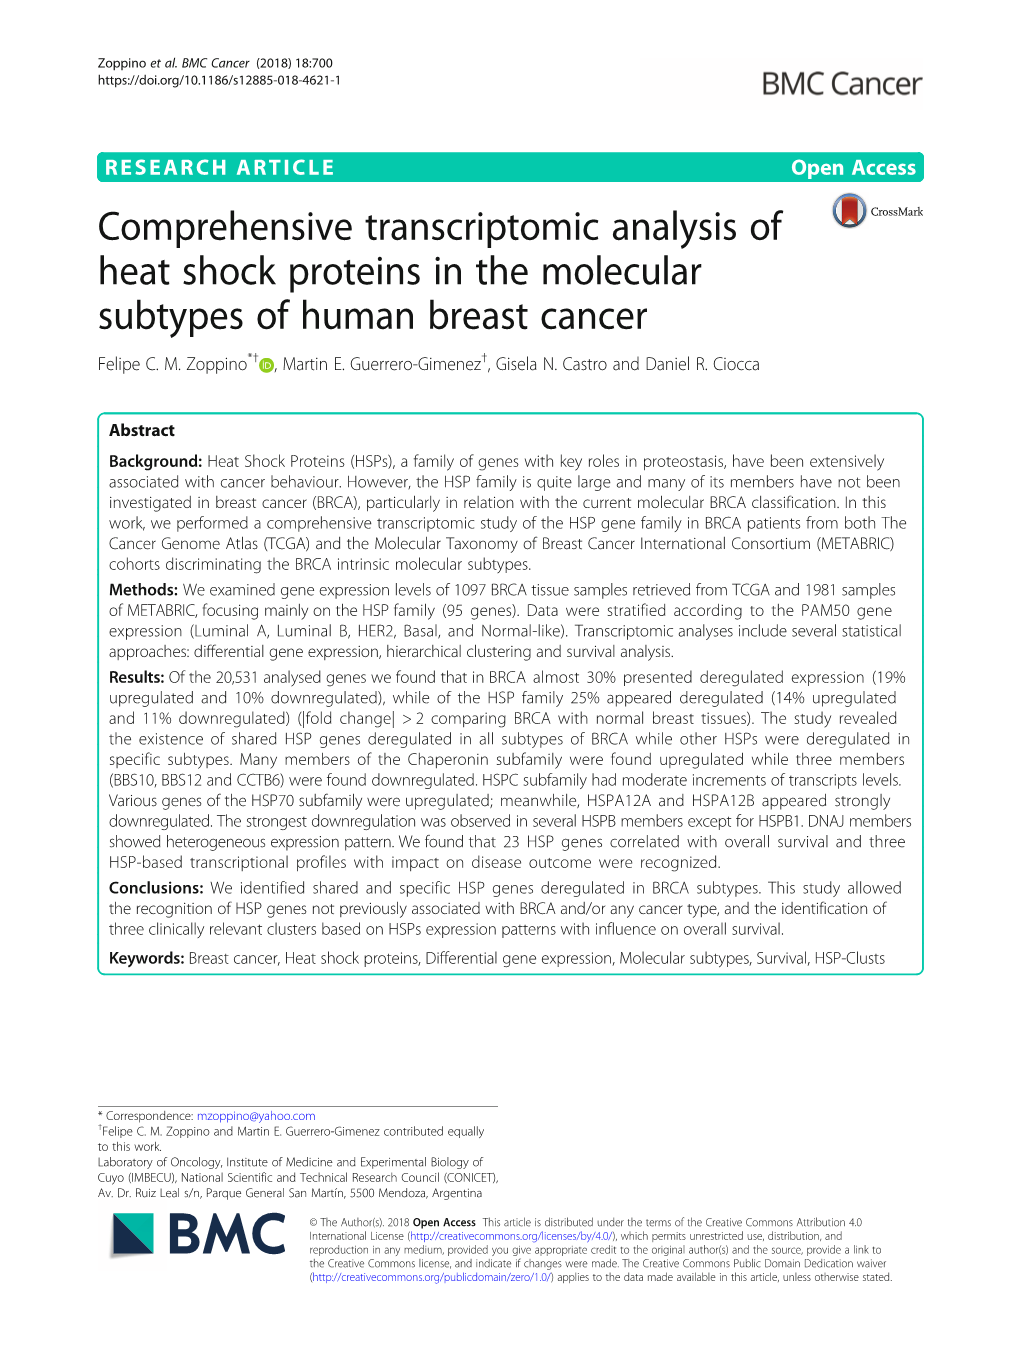 Comprehensive Transcriptomic Analysis of Heat Shock Proteins in the Molecular Subtypes of Human Breast Cancer Felipe C